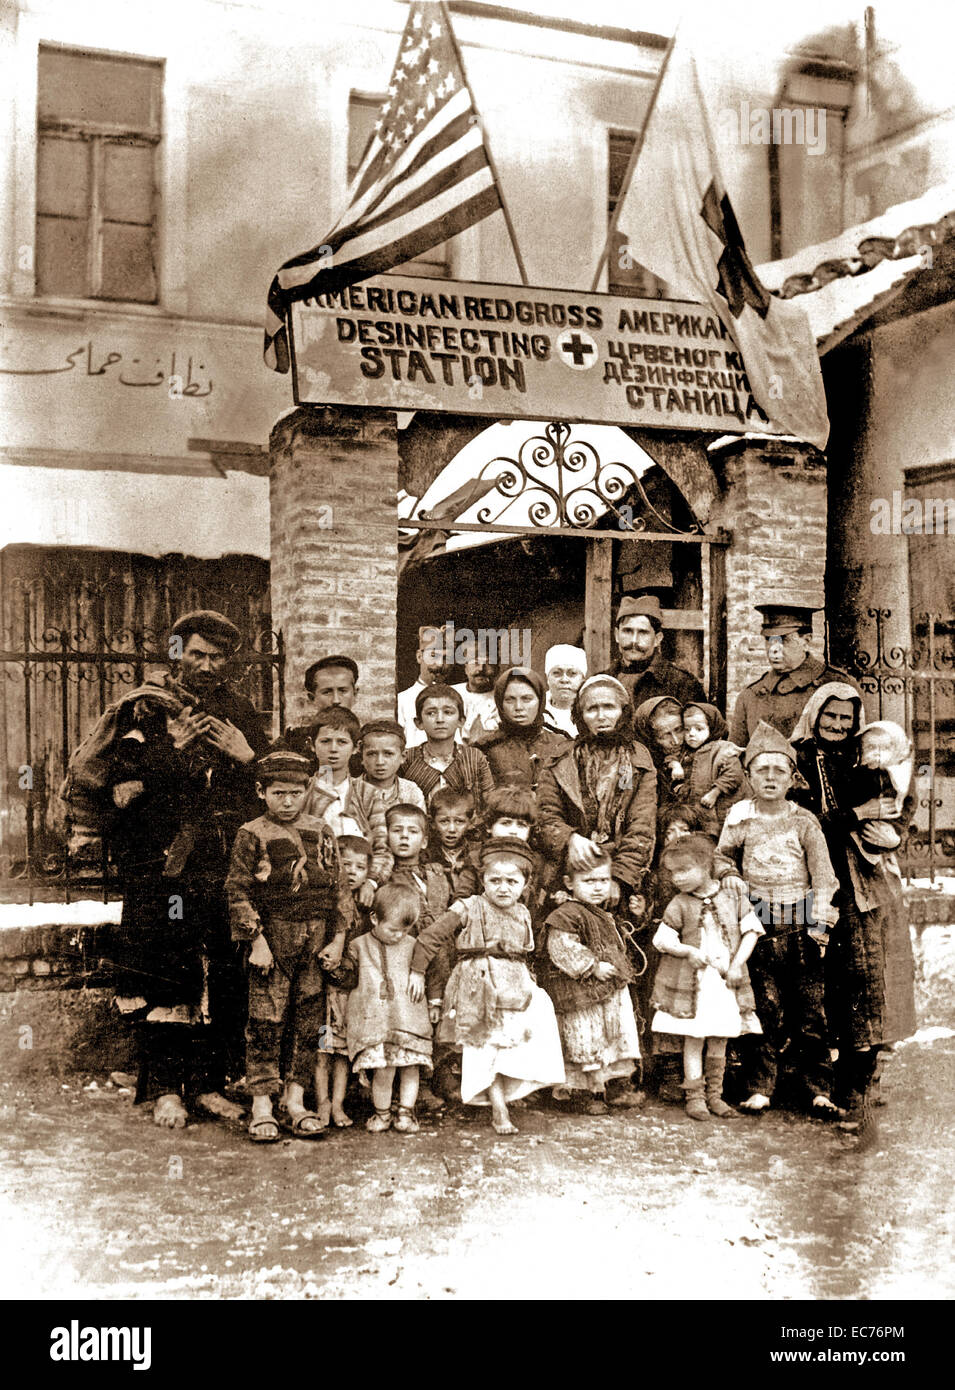 Refugees of Serbia entering Uskut showing the disheartened men, women, and children as they streamed in.  Ca. 1917-19.  American Red Cross Stock Photo